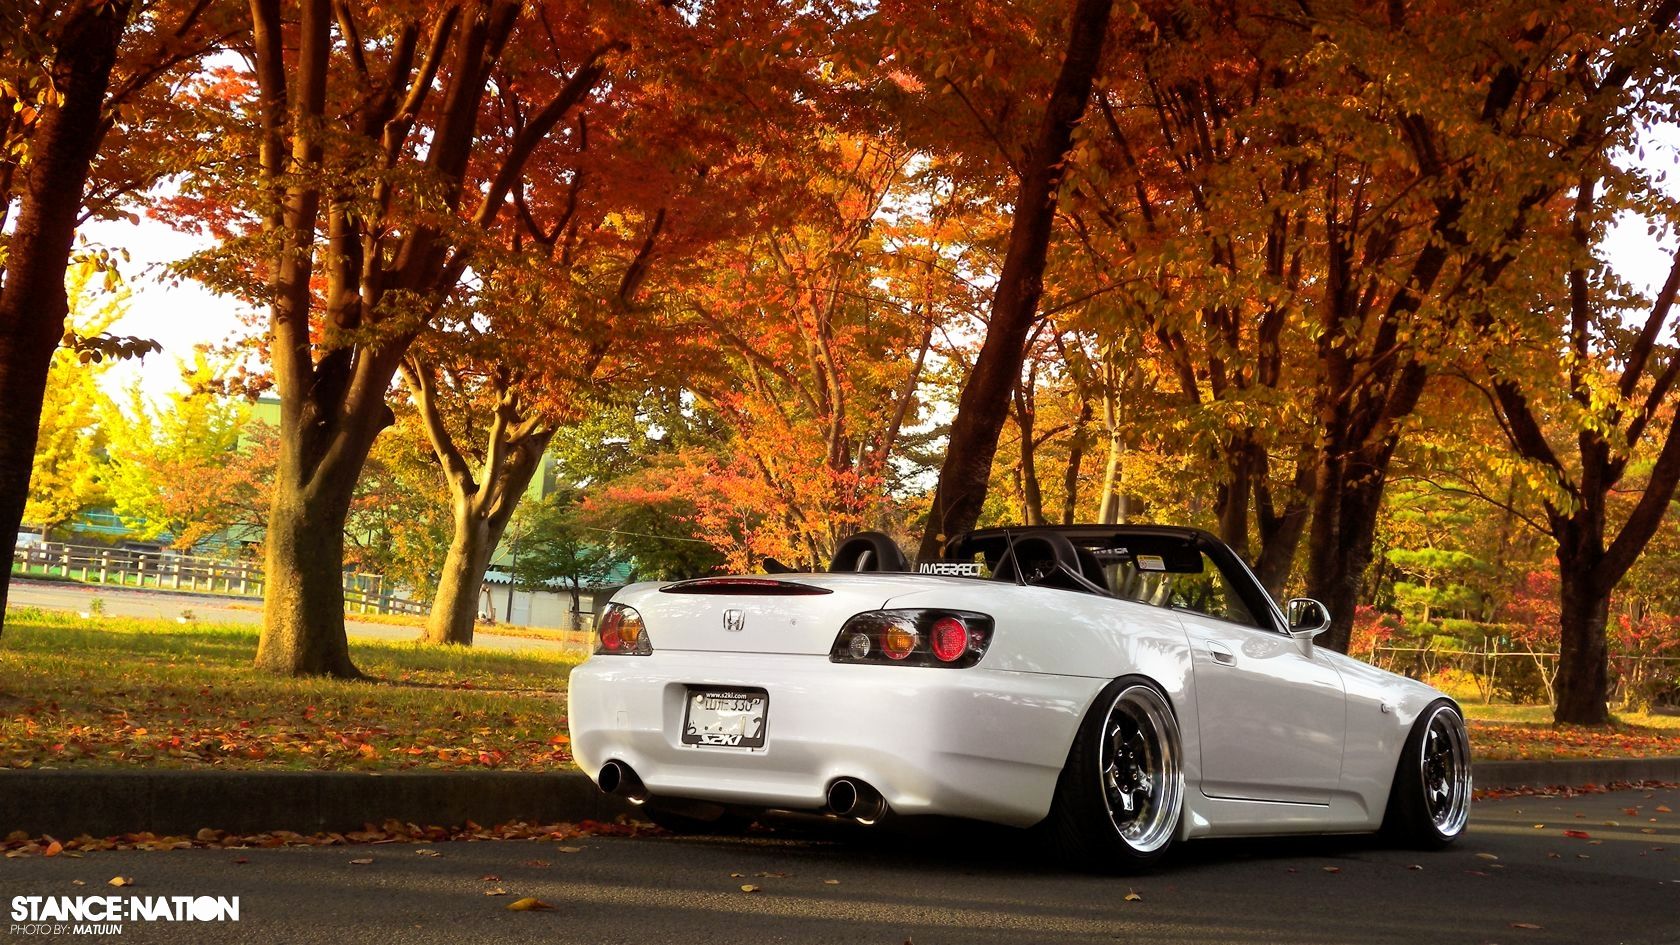 Stancenation Wallpaper Awesome Stanced Wallpaper Of the Day of The Hudson